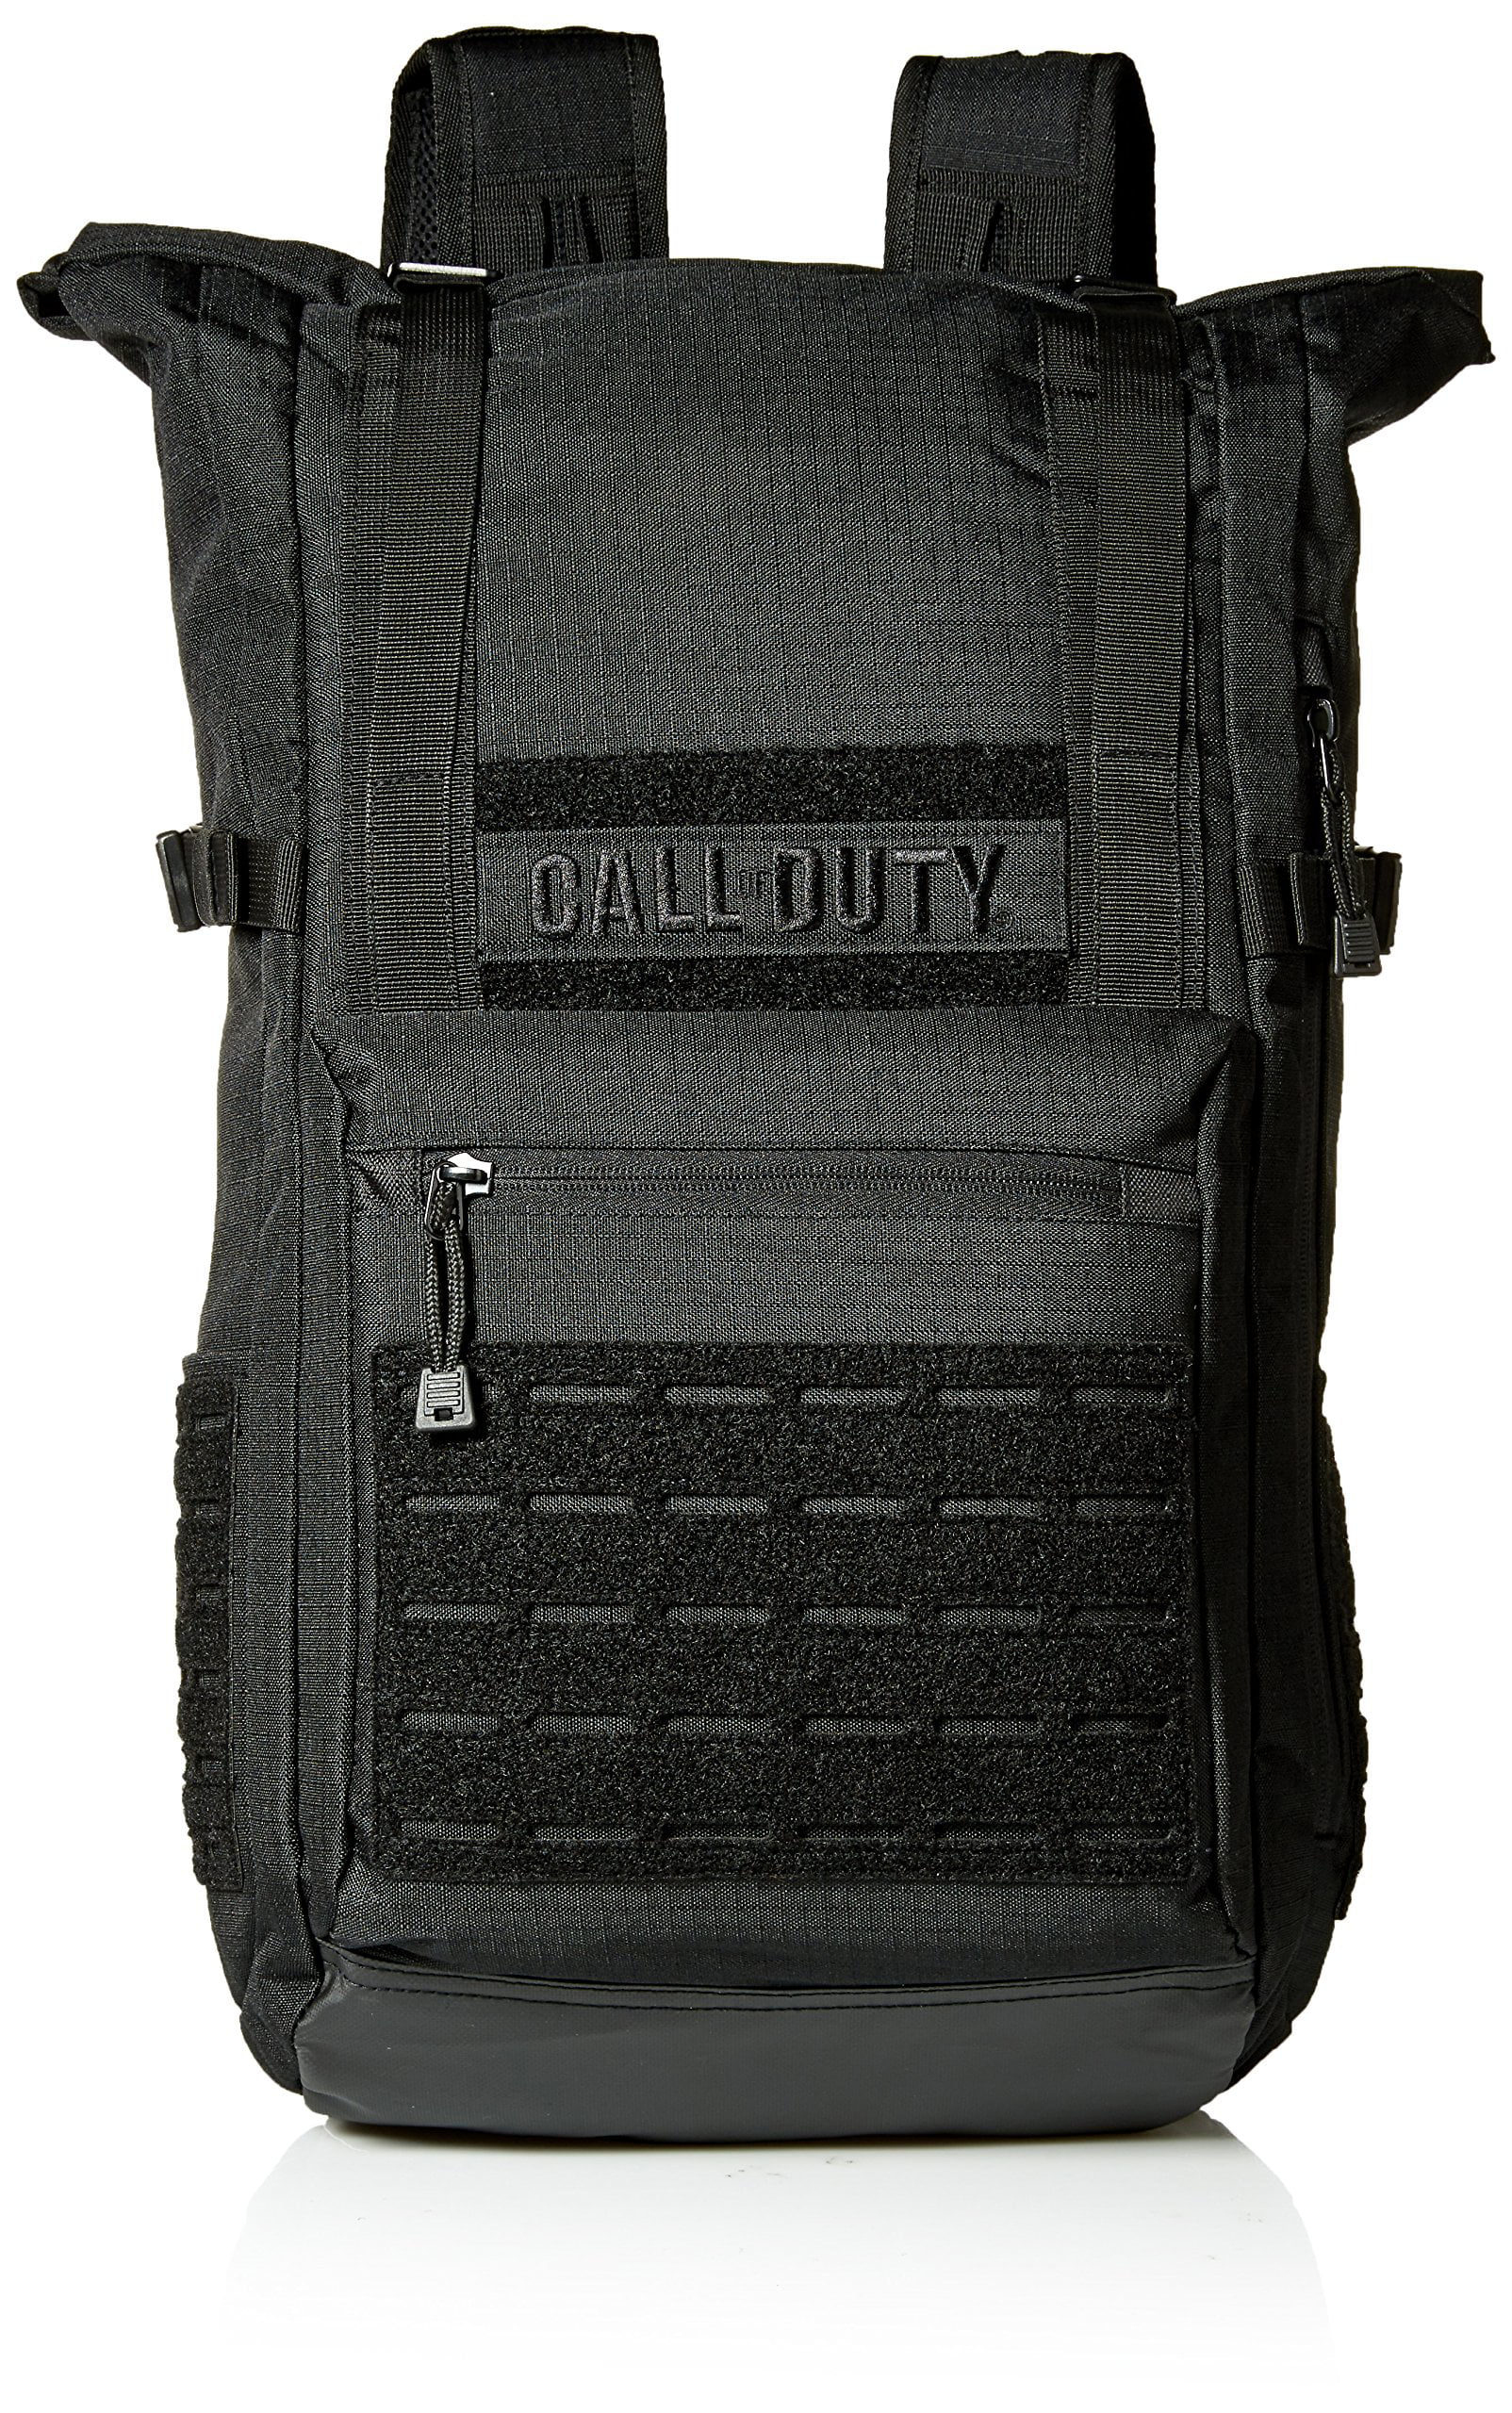 Call of Duty Convertible Military Backpack Messenger School Bag